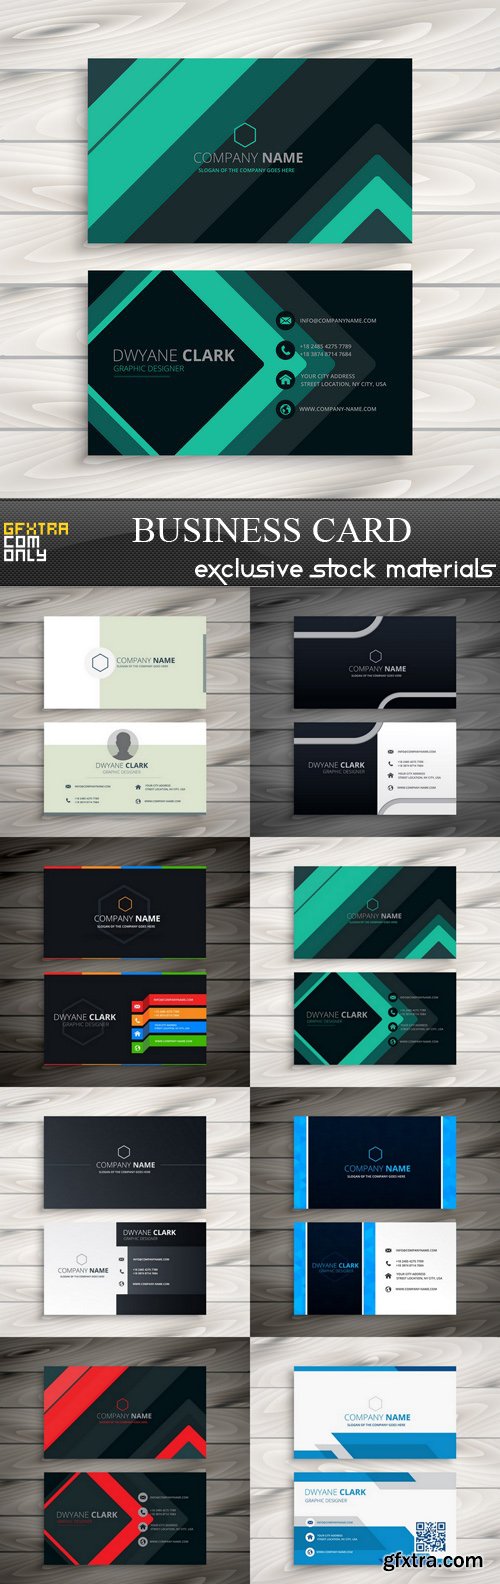 Business Card - 8 EPS